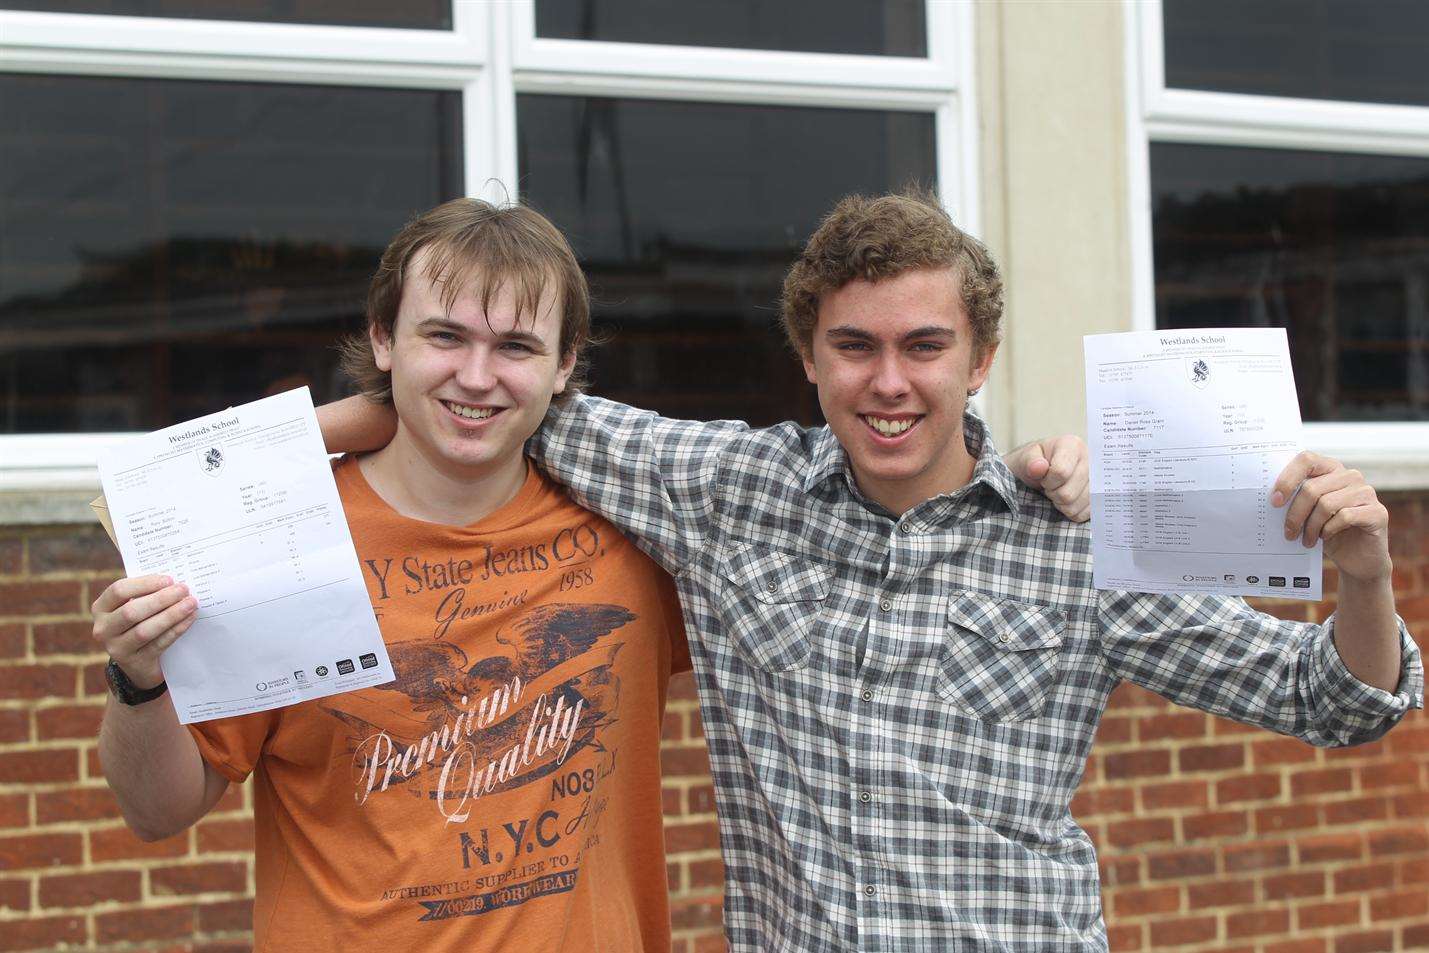 Rory Bolton and Dan Grant friends since primary school and now leaving Westlands School together, are very happy with their A-level results